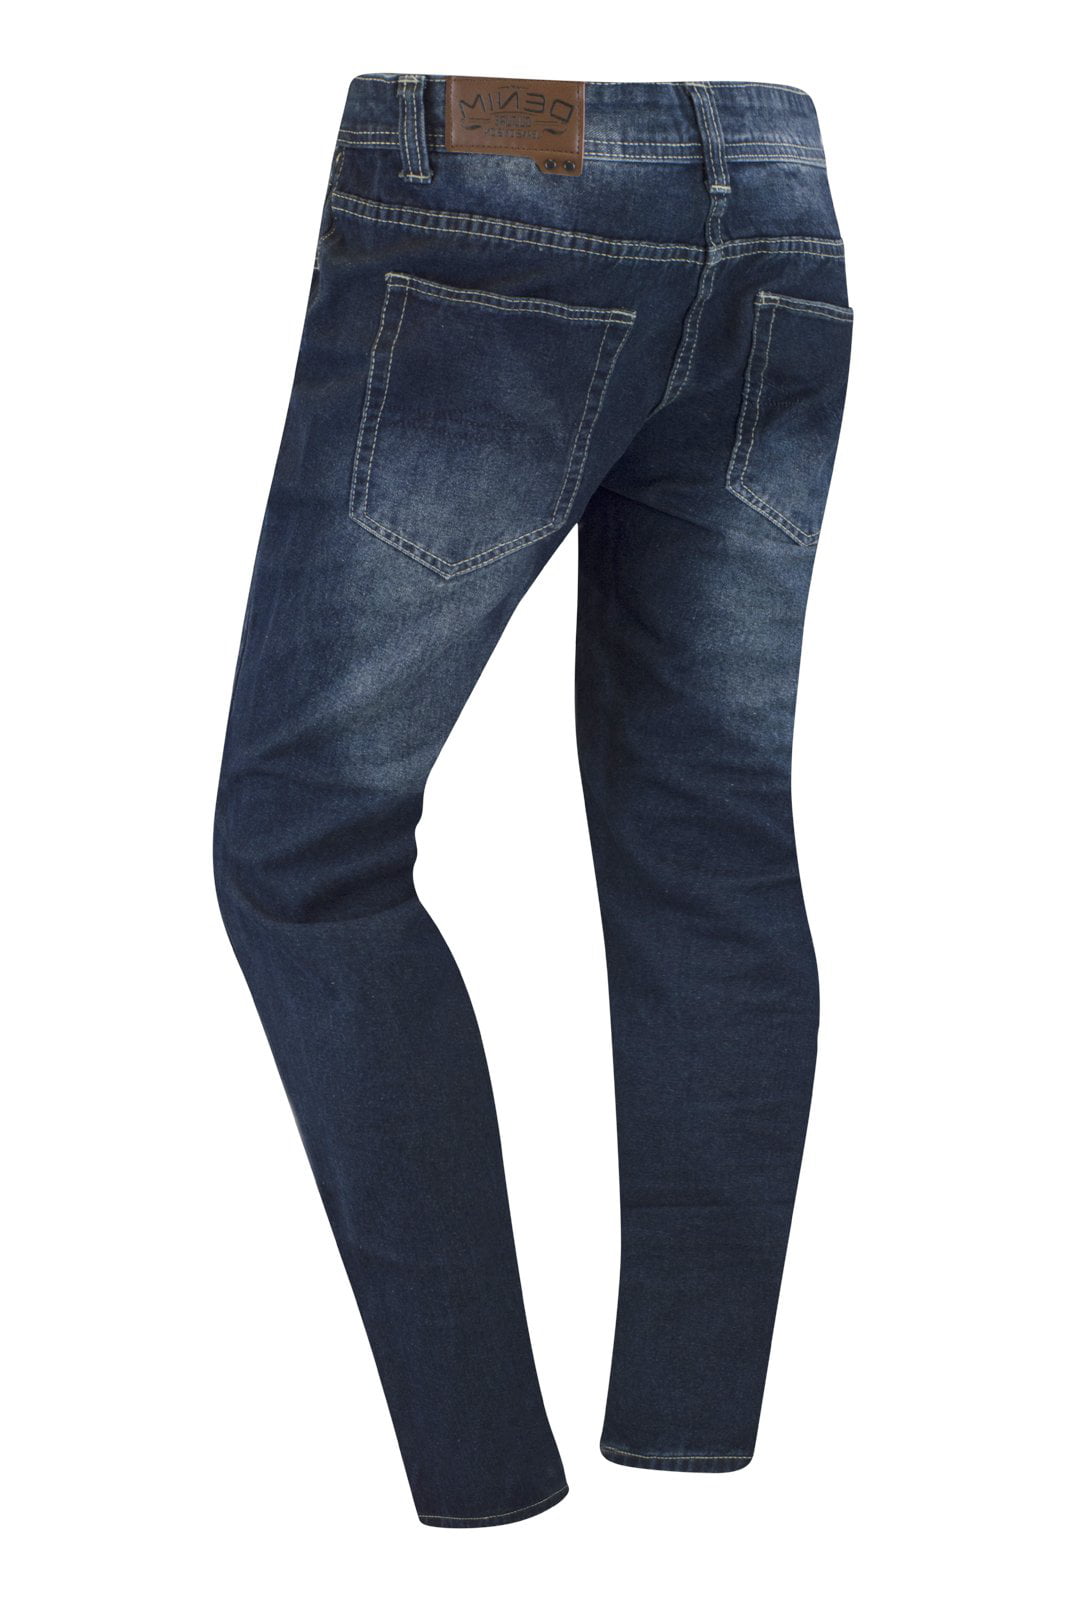 Trending Apparel New Men Ripped Blue Jeans with Bandana Print 